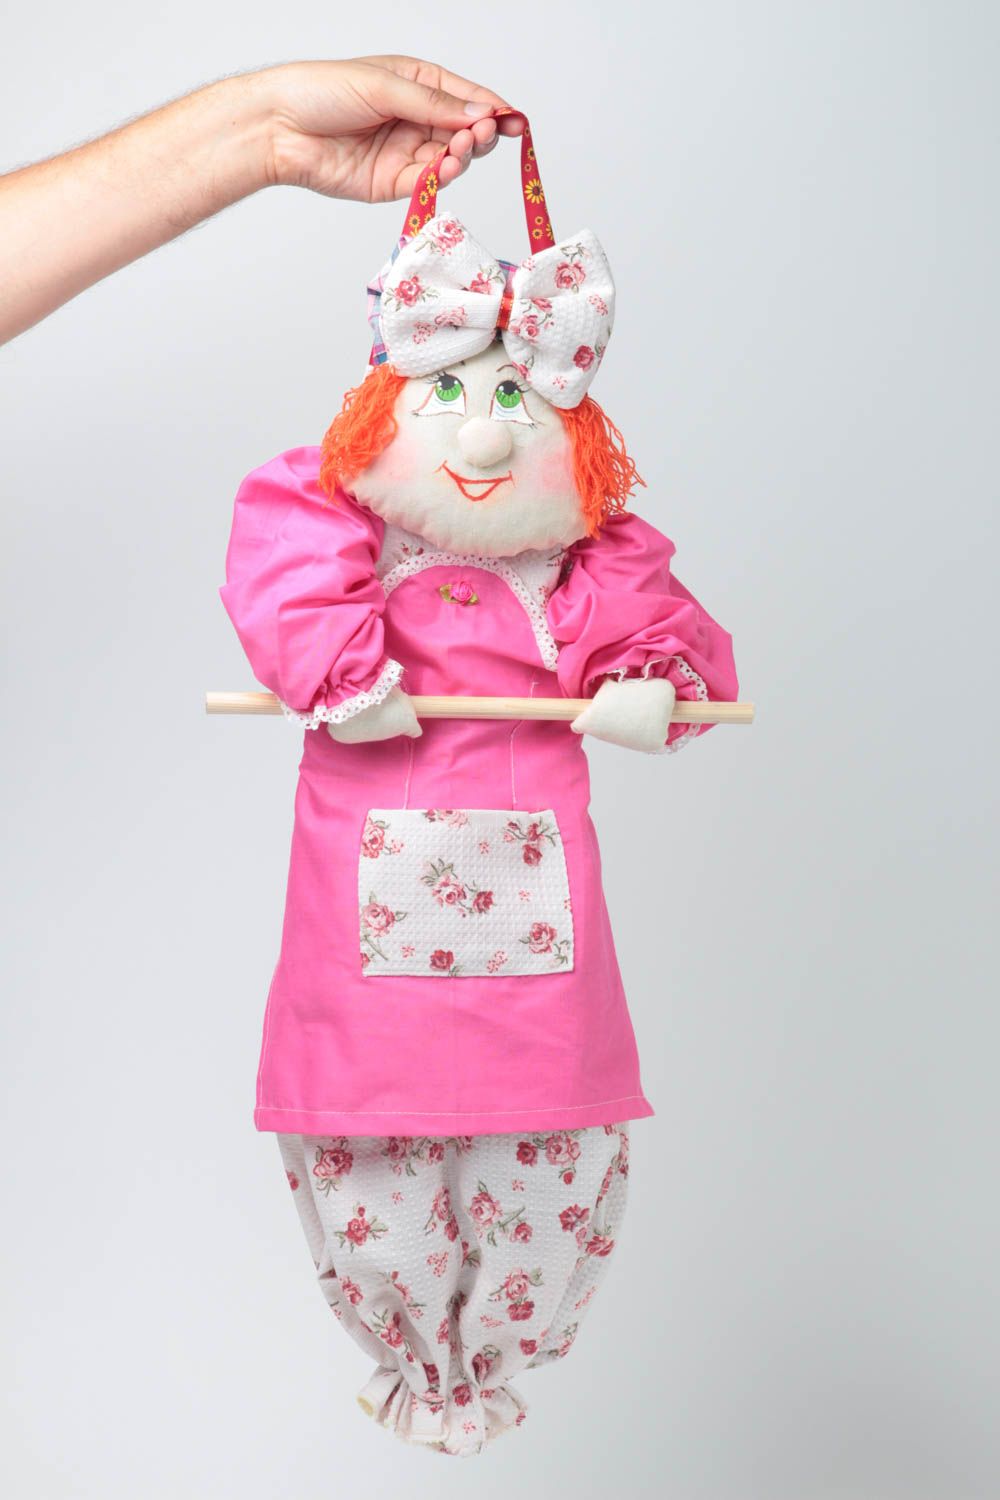 Handmade soft toy rag doll stuffed toy for keeping plastic bags kitchen designs photo 5